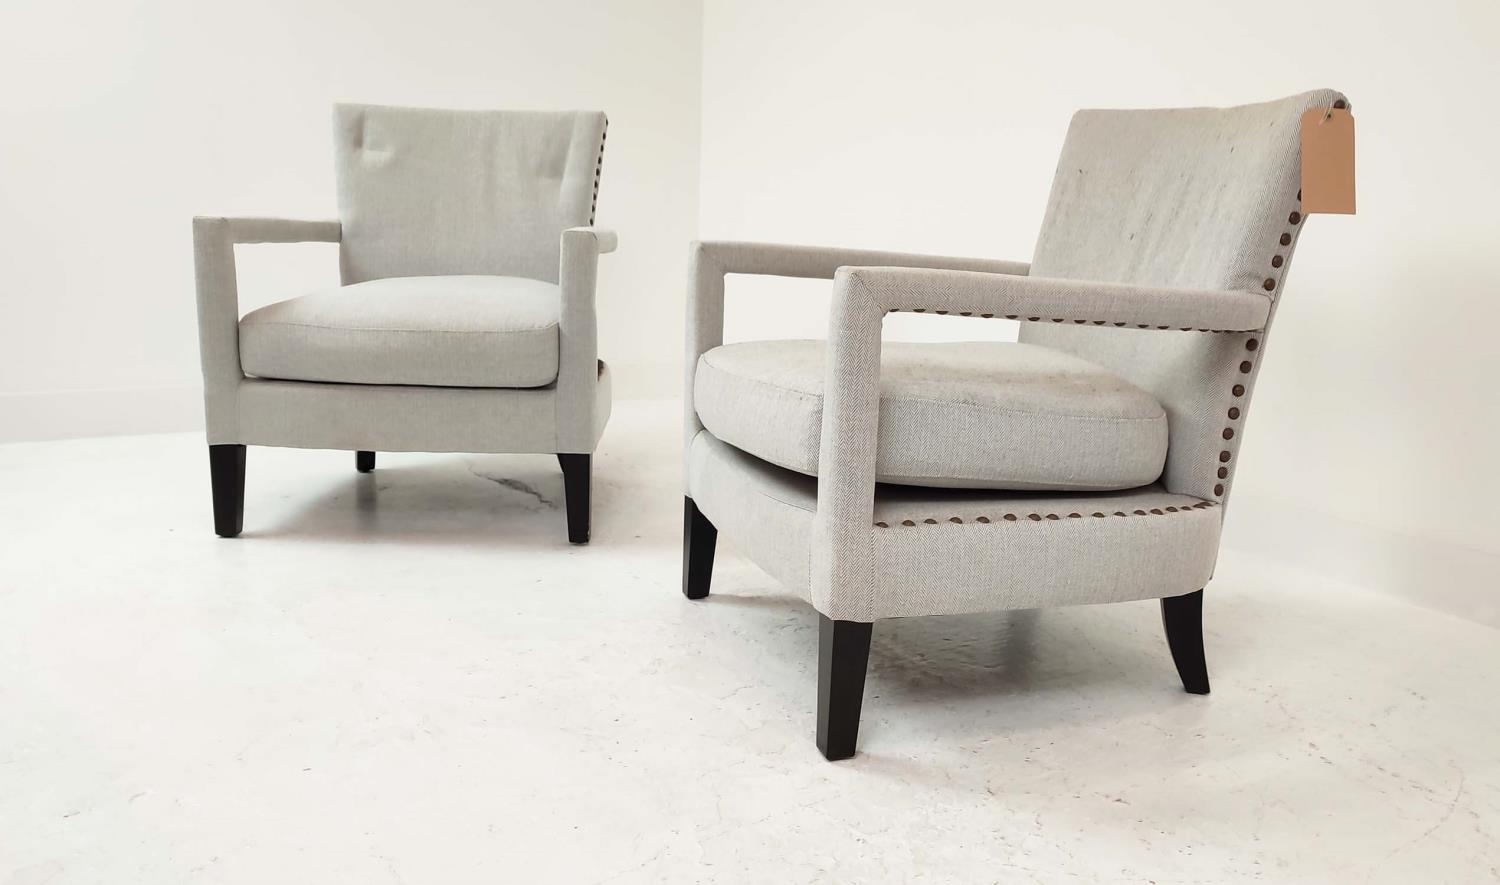 EICHHOLTZ ARMCHAIRS, a pair, light grey upholstery with studded detail, 80cm H x 70cm W x 80cm D. ( - Image 2 of 7